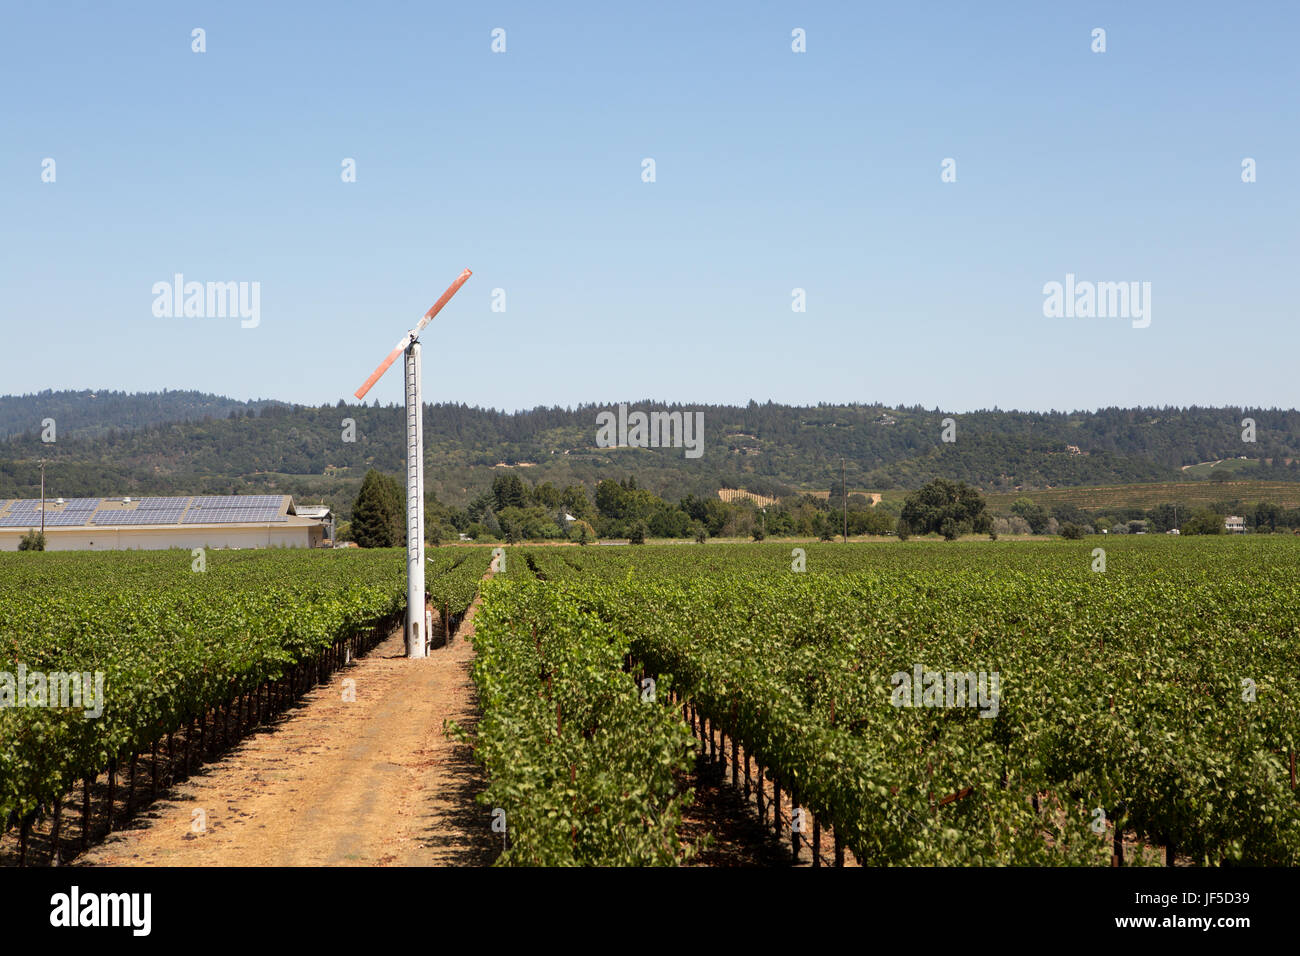 A wind tower stands near a winery amongst rows of grape vineyards in Napa Valley. Stock Photo